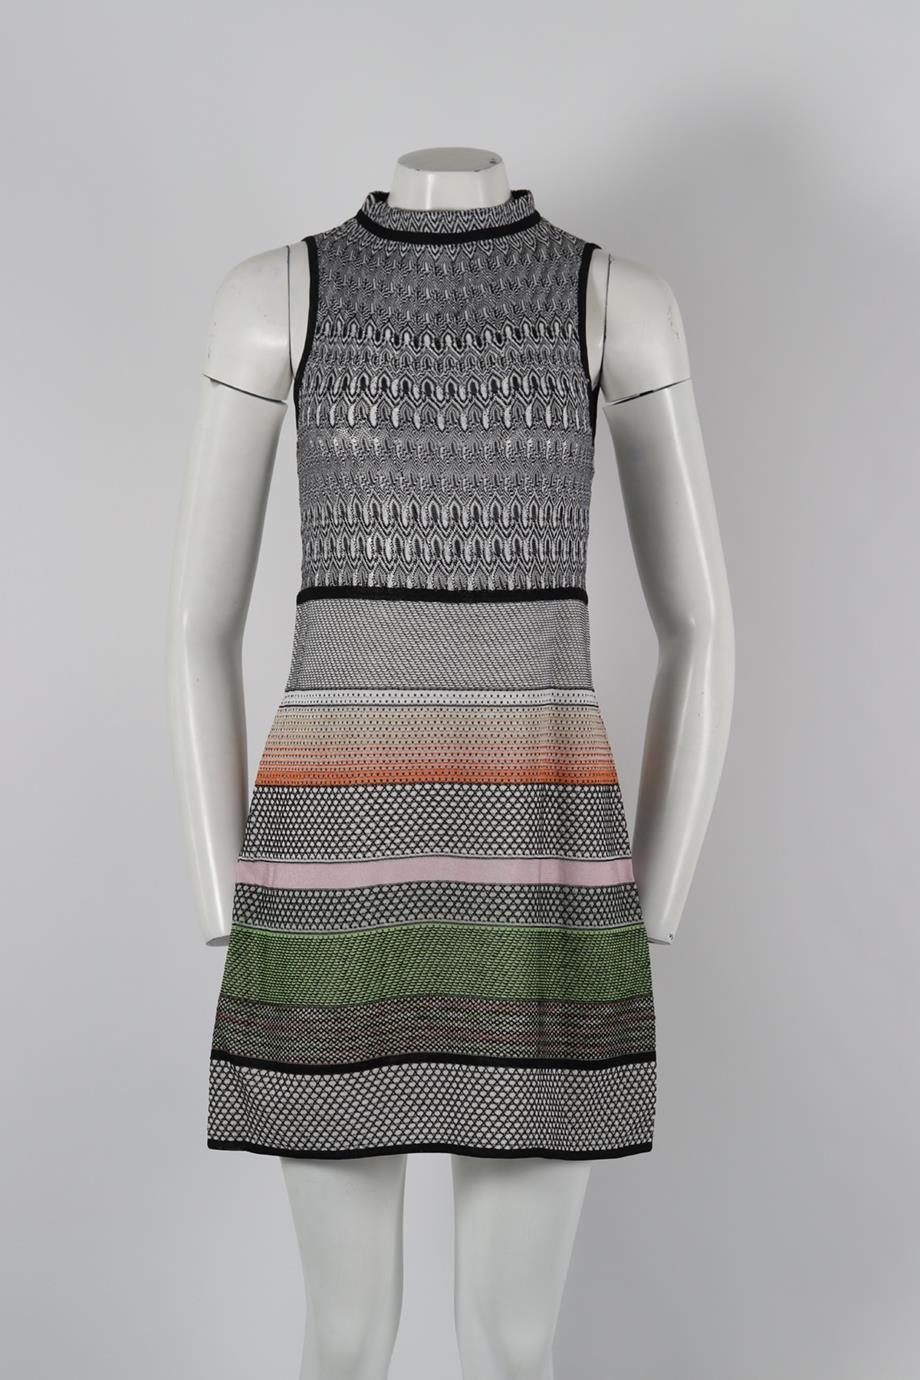 Missoni Crochet Knit Mini Dress. Black, white, pink and green. Sleeveless. Crewneck. Tie fastening - Back. 73% Rayon, 12% polyester, 7% acetate, 5% nylon, 3% flax. IT 38 (UK 6, US 2, FR 34). Bust: 27.2 in. Waist: 30 in. Hips: 35.4 in. Length: 33.6